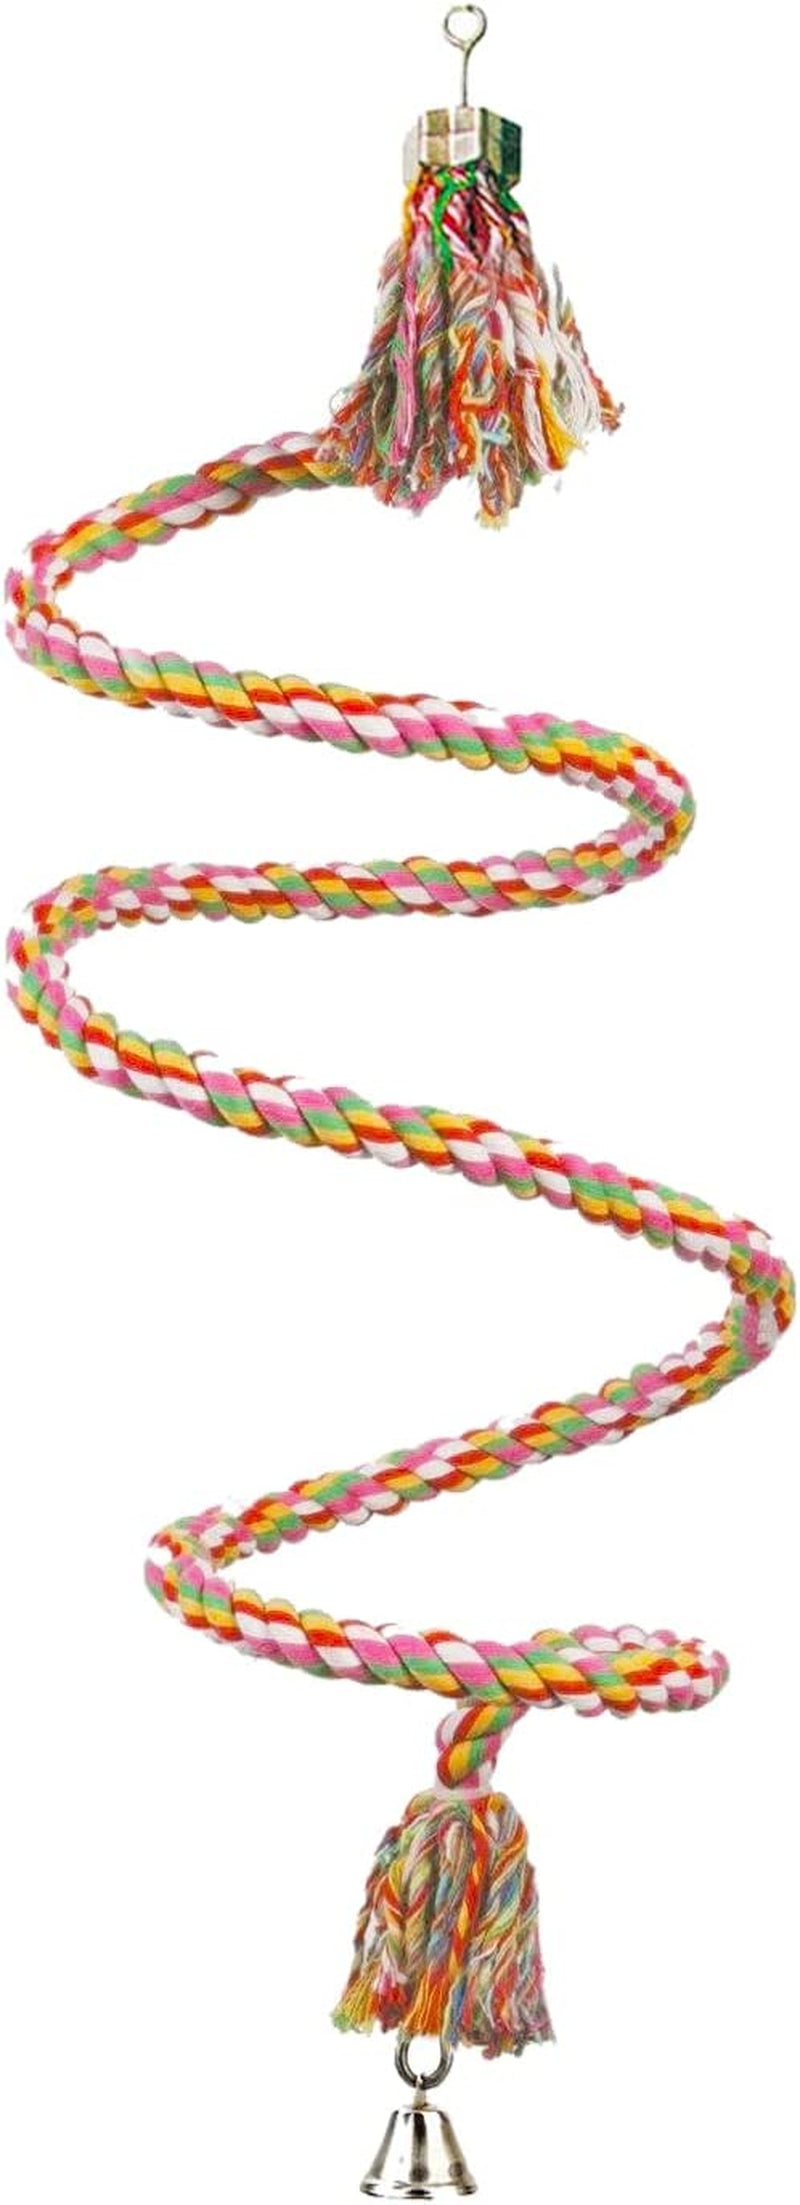 Sungrow Rope Perch for Hamsters, Sugar Gliders, Reptiles, 59” Long, Spiral Design with Jingling Bell, Vibrant Handmade Chew Toy Animals & Pet Supplies > Pet Supplies > Bird Supplies > Bird Toys SunGrow   